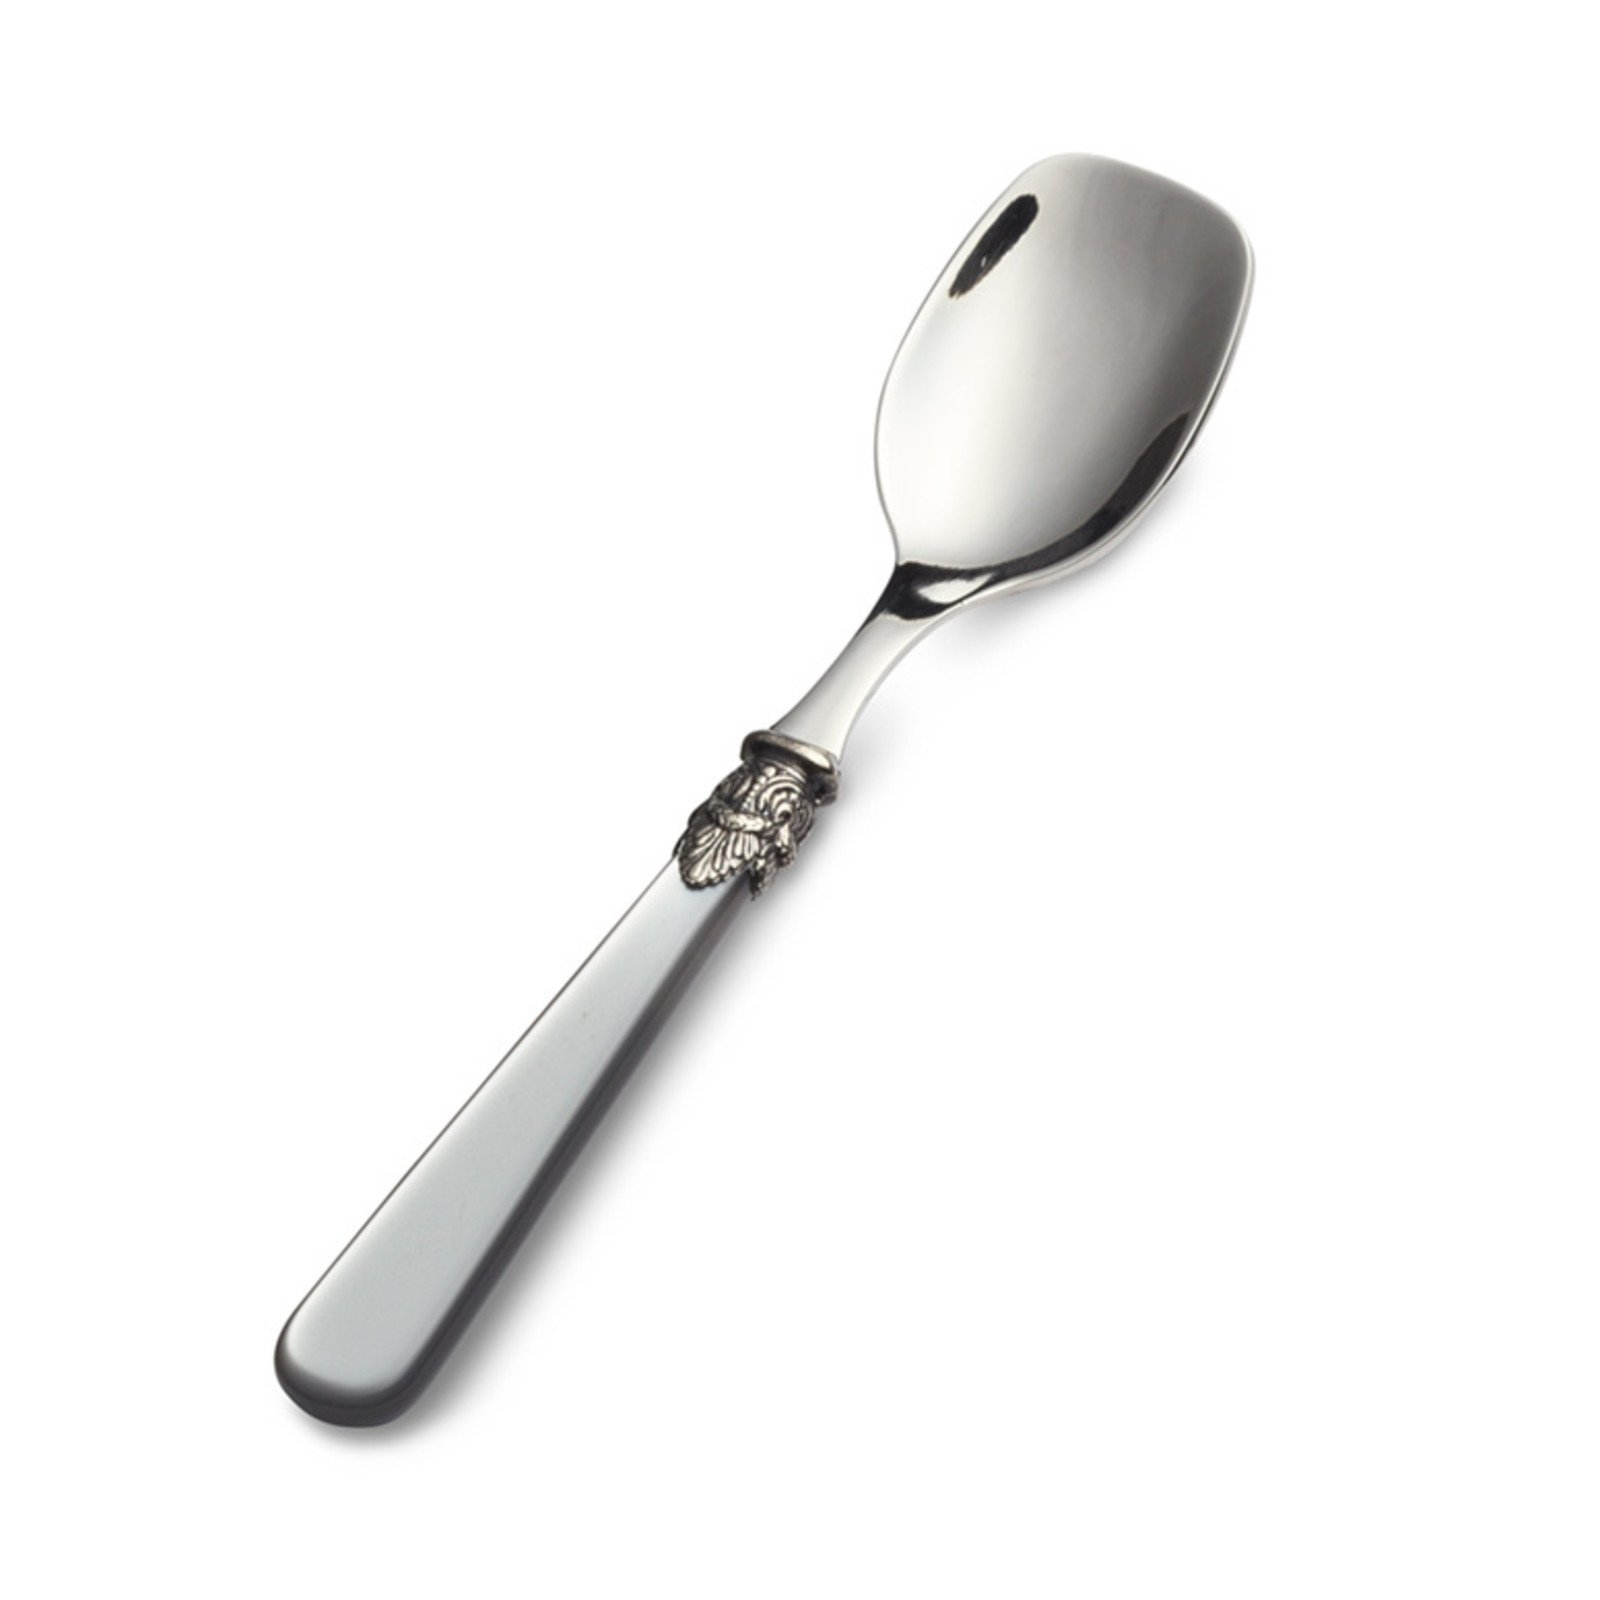 Ice Cream Spoon / Dessert Spoon, Gray with Mother of Pearl